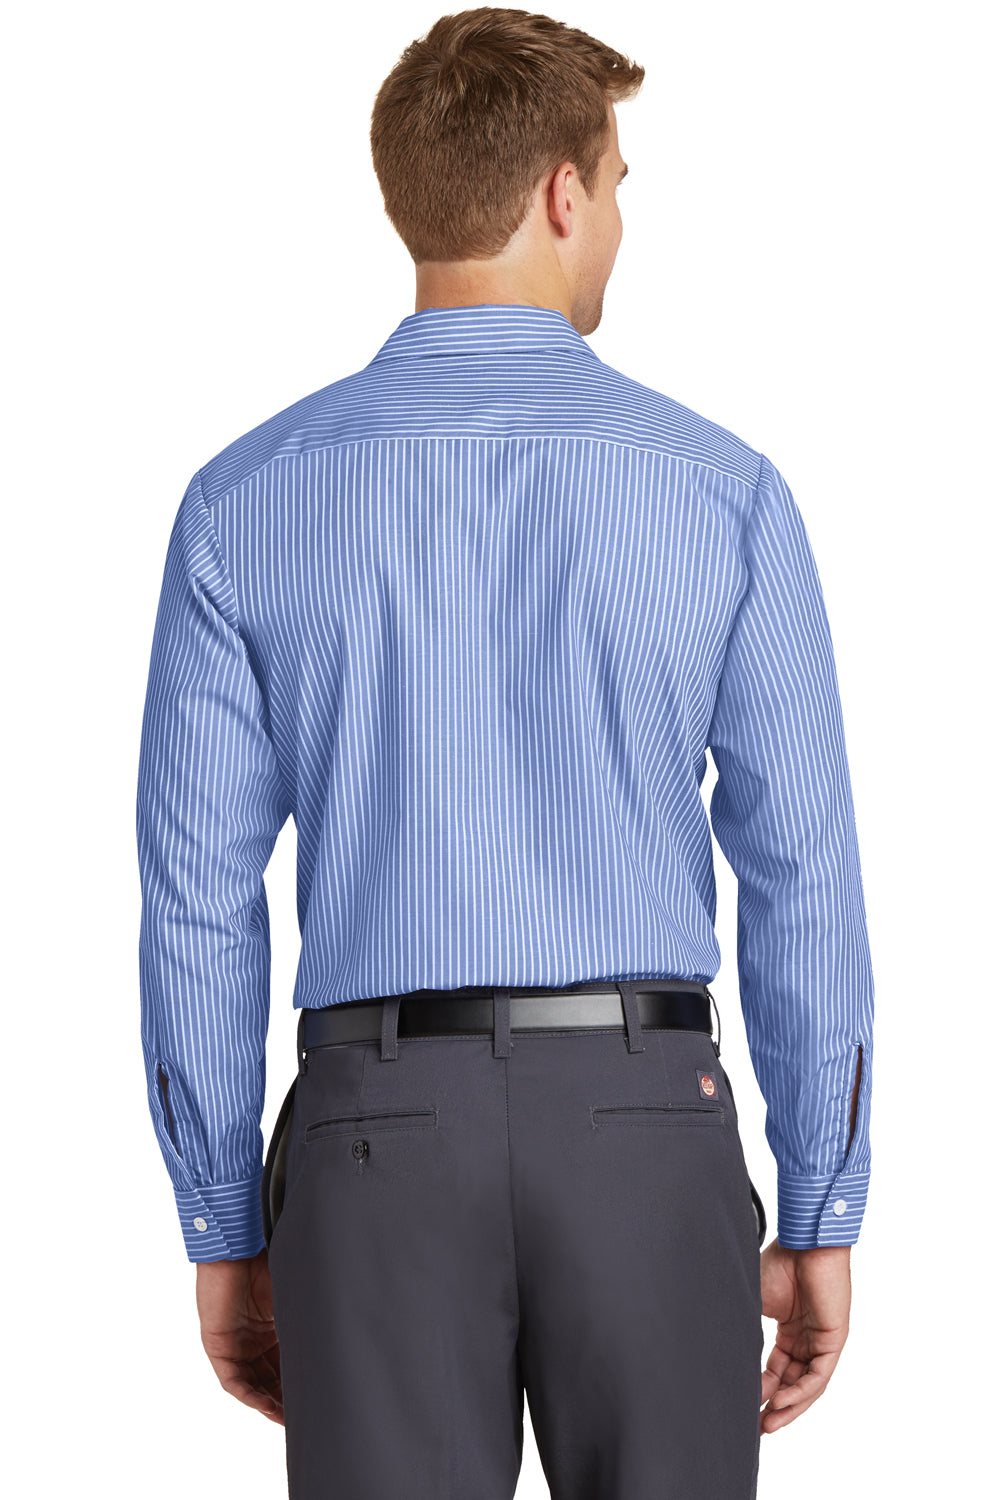 Red Kap CS10 Mens Industrial Moisture Wicking Long Sleeve Button Down Shirt w/ Double Pockets Blue/White Back